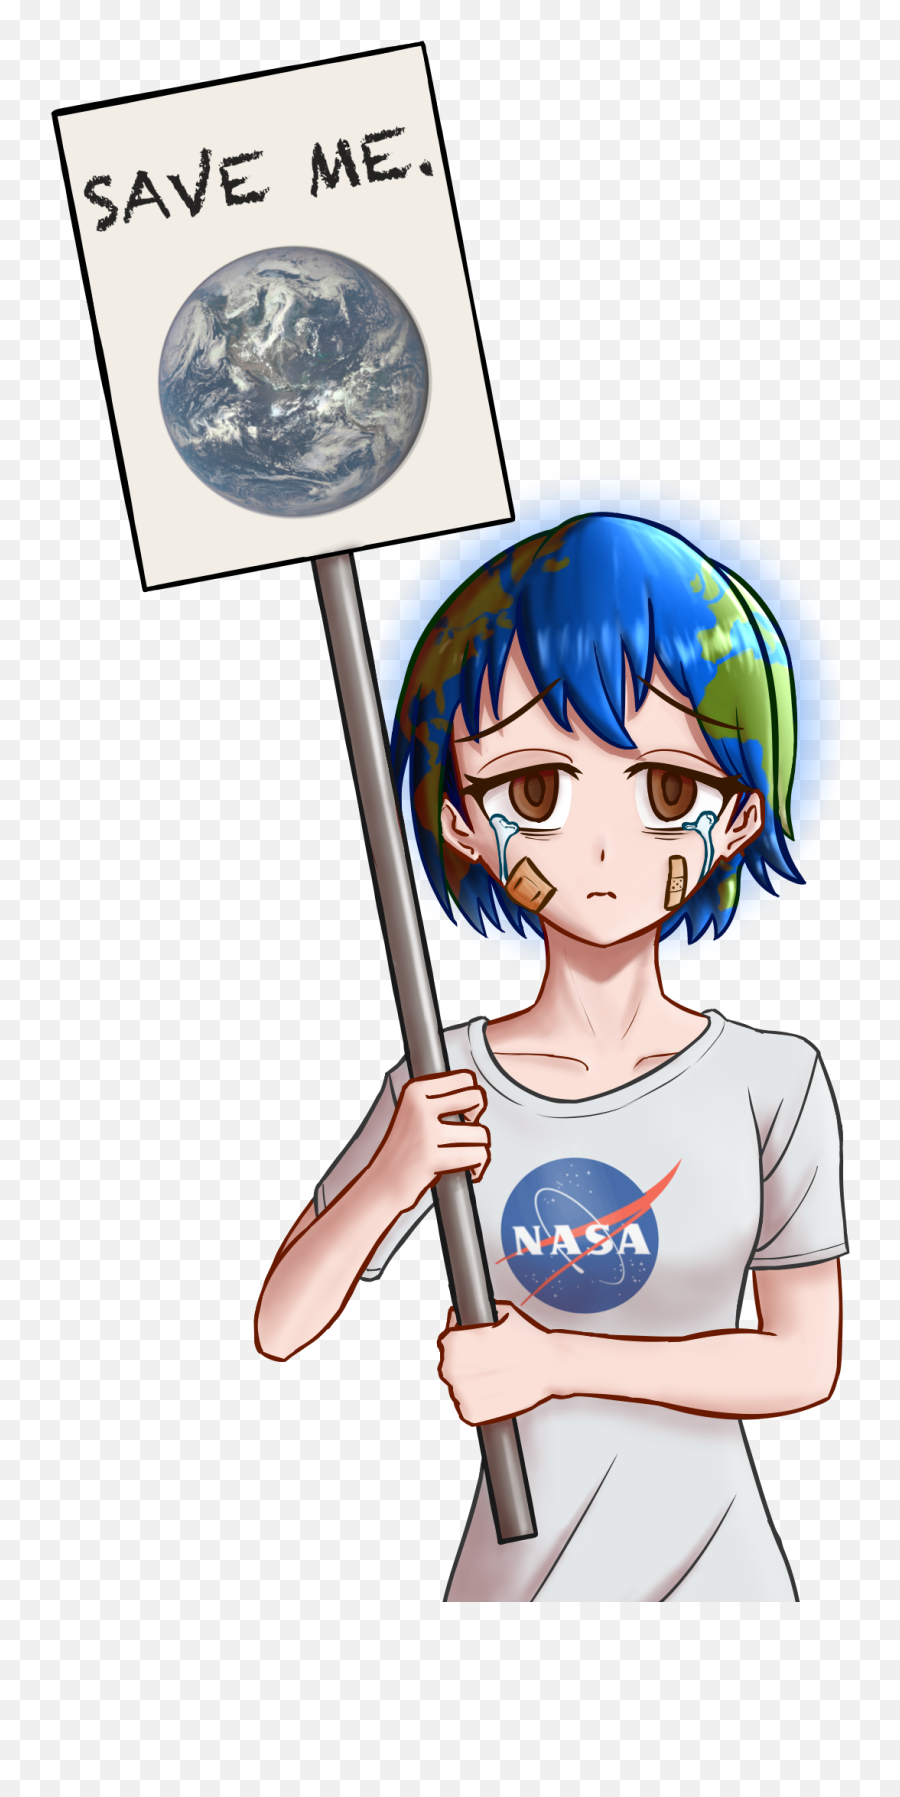 Save The Earth By Harm07 - Anime Save The Earth Png,Cartoon Earth Png